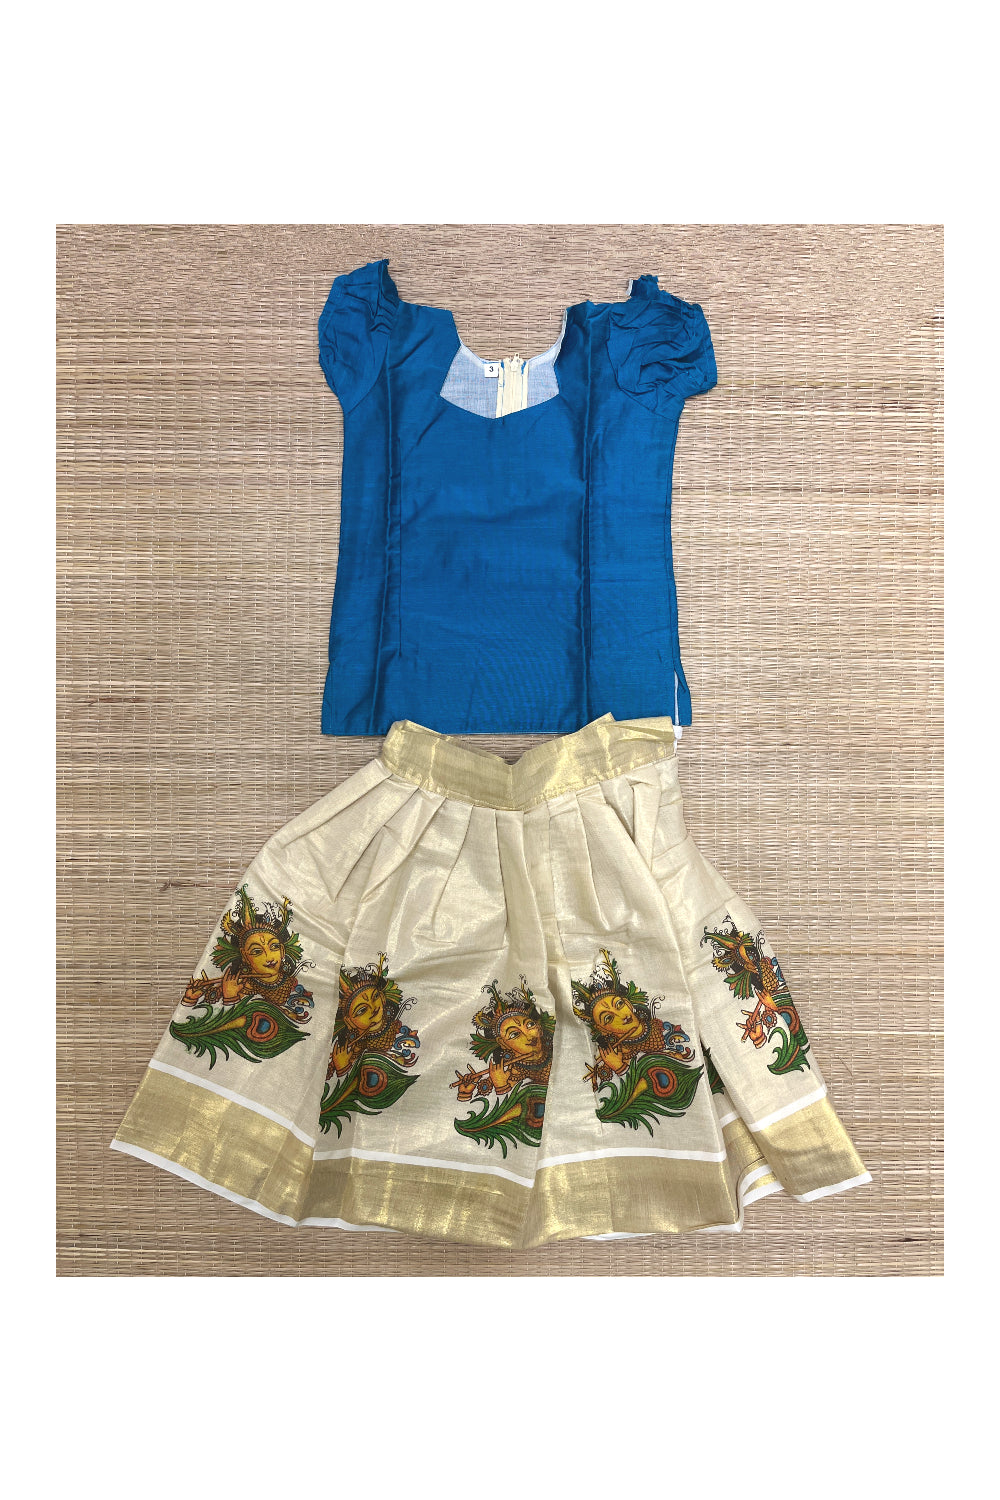 Southloom Kerala Tissue Pavada and Blouse with Krishna Mural Designs (Age - 3 Years)